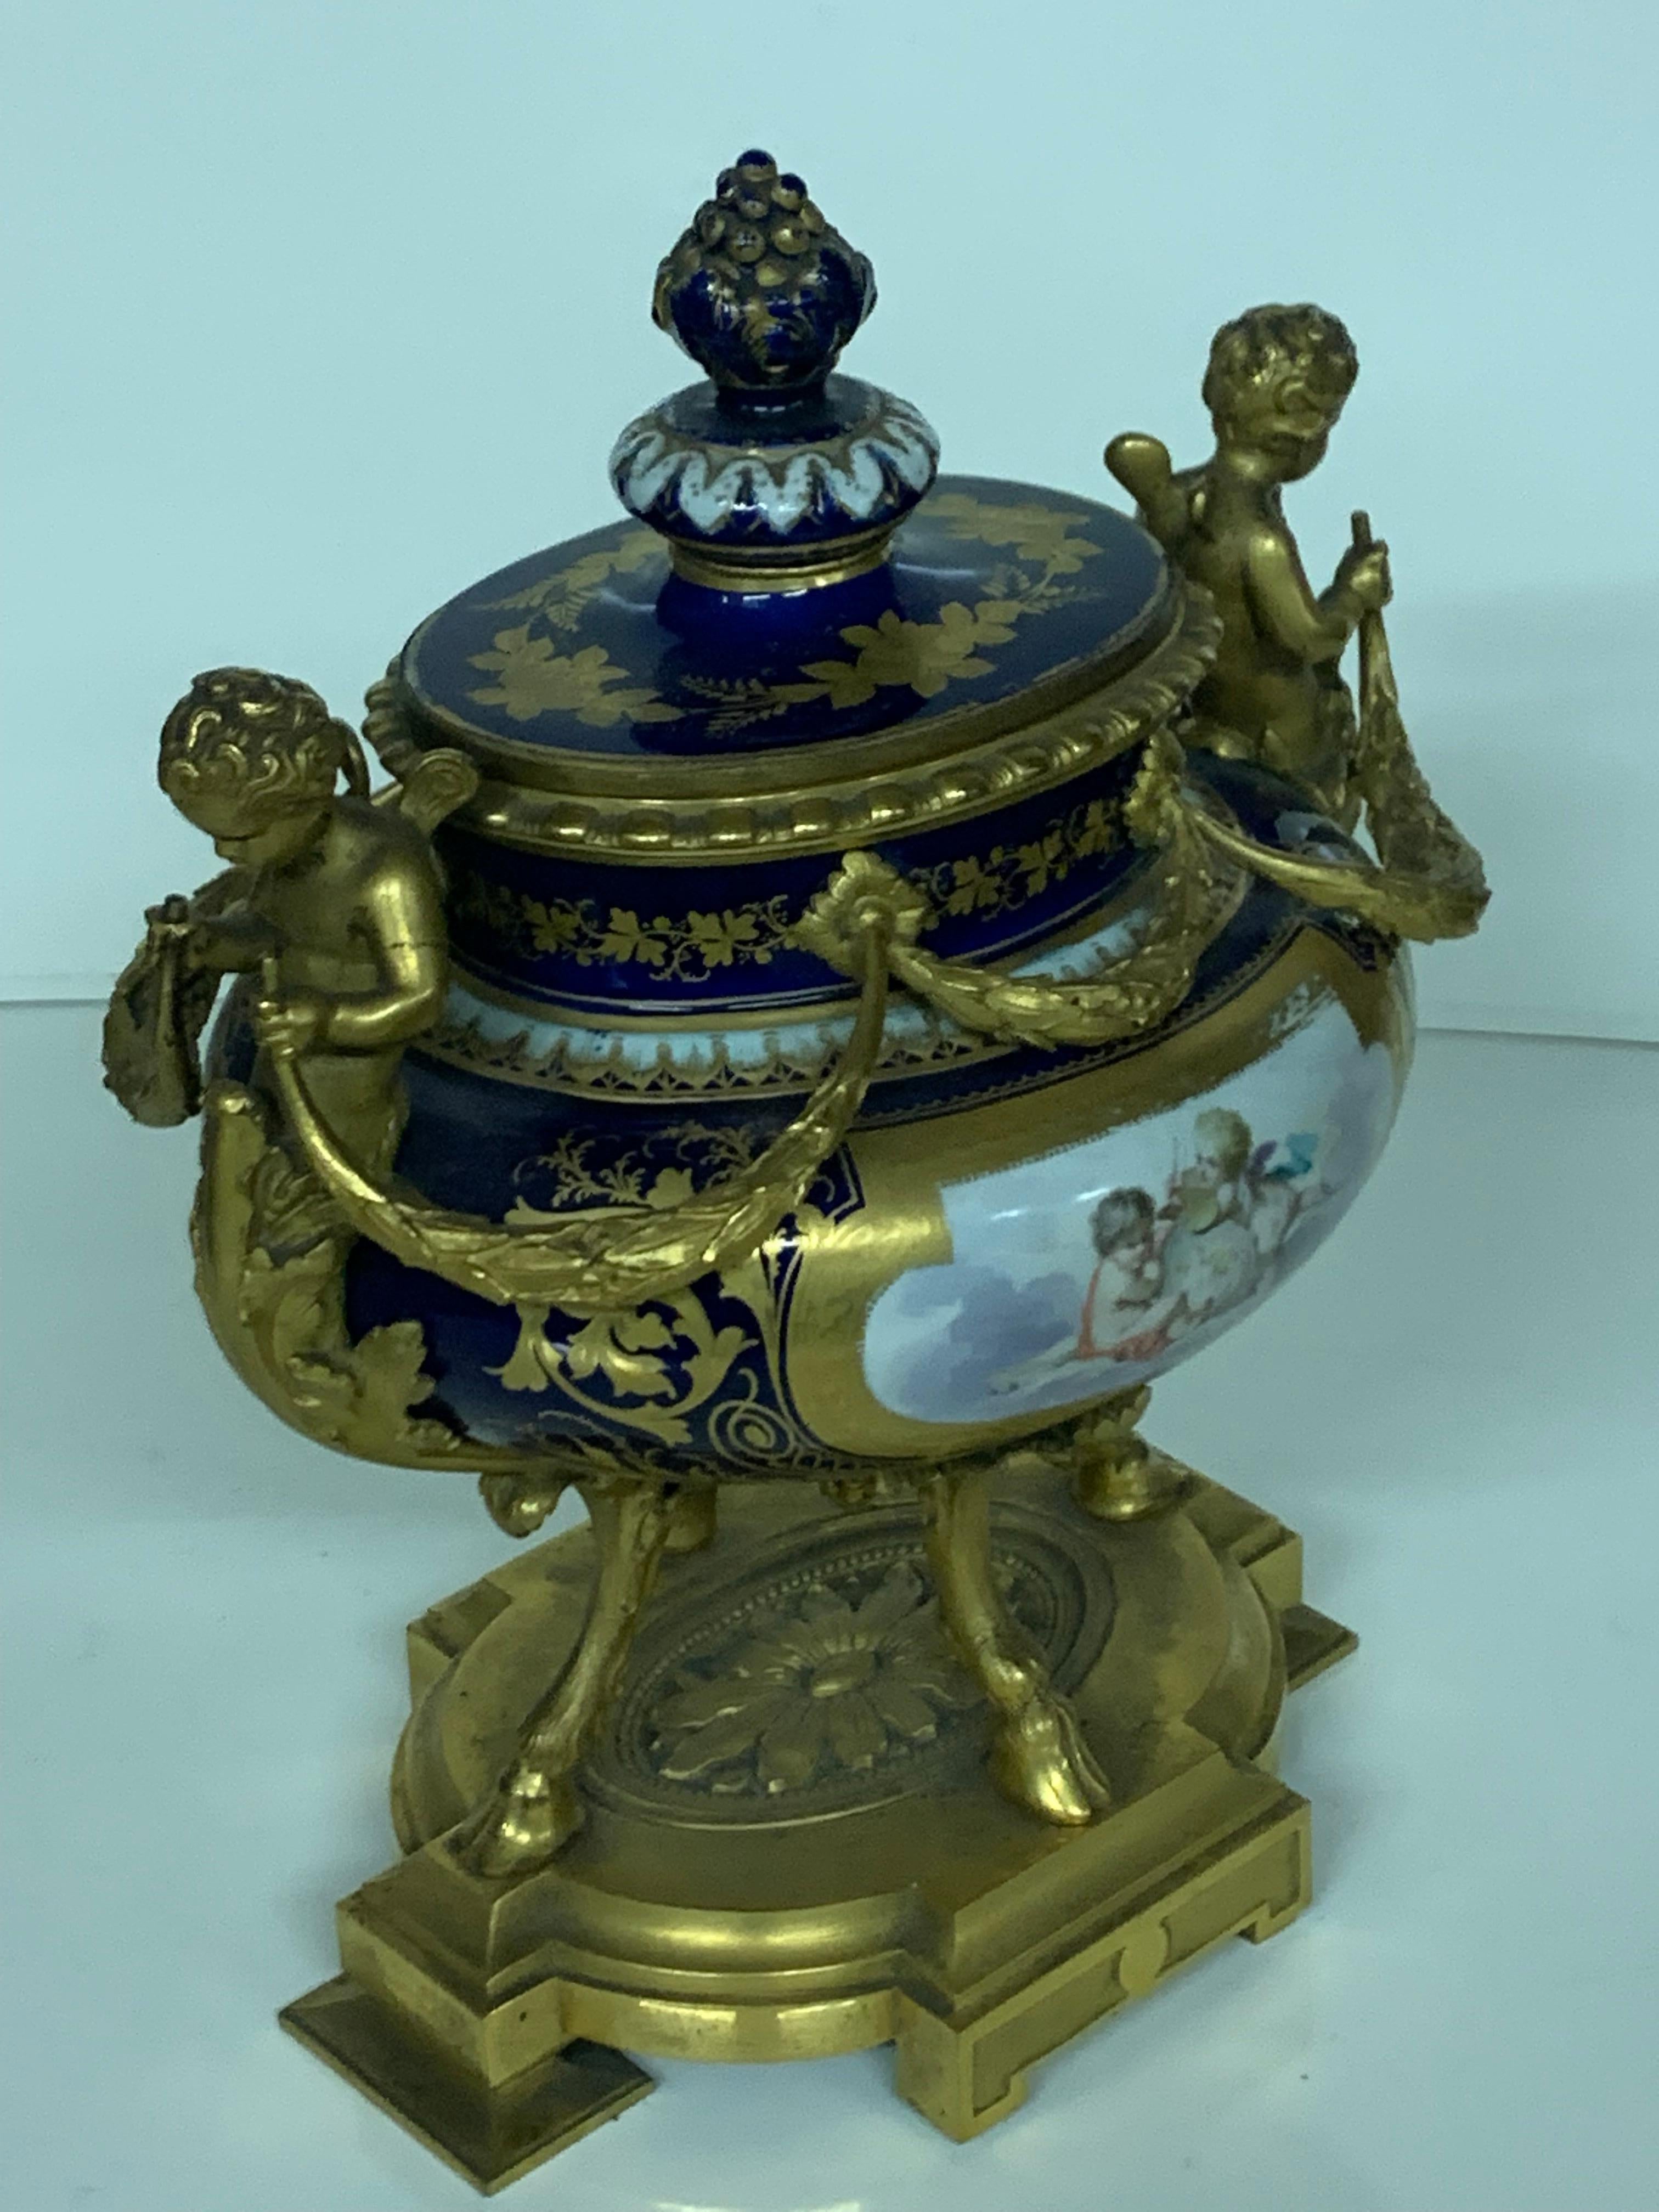 Magnificent brule parfum in porcelain sevres style ,ormolu bronze with cherub on each side ,the top is finish by a pine seedin porcelain.This pieces is in original condition
